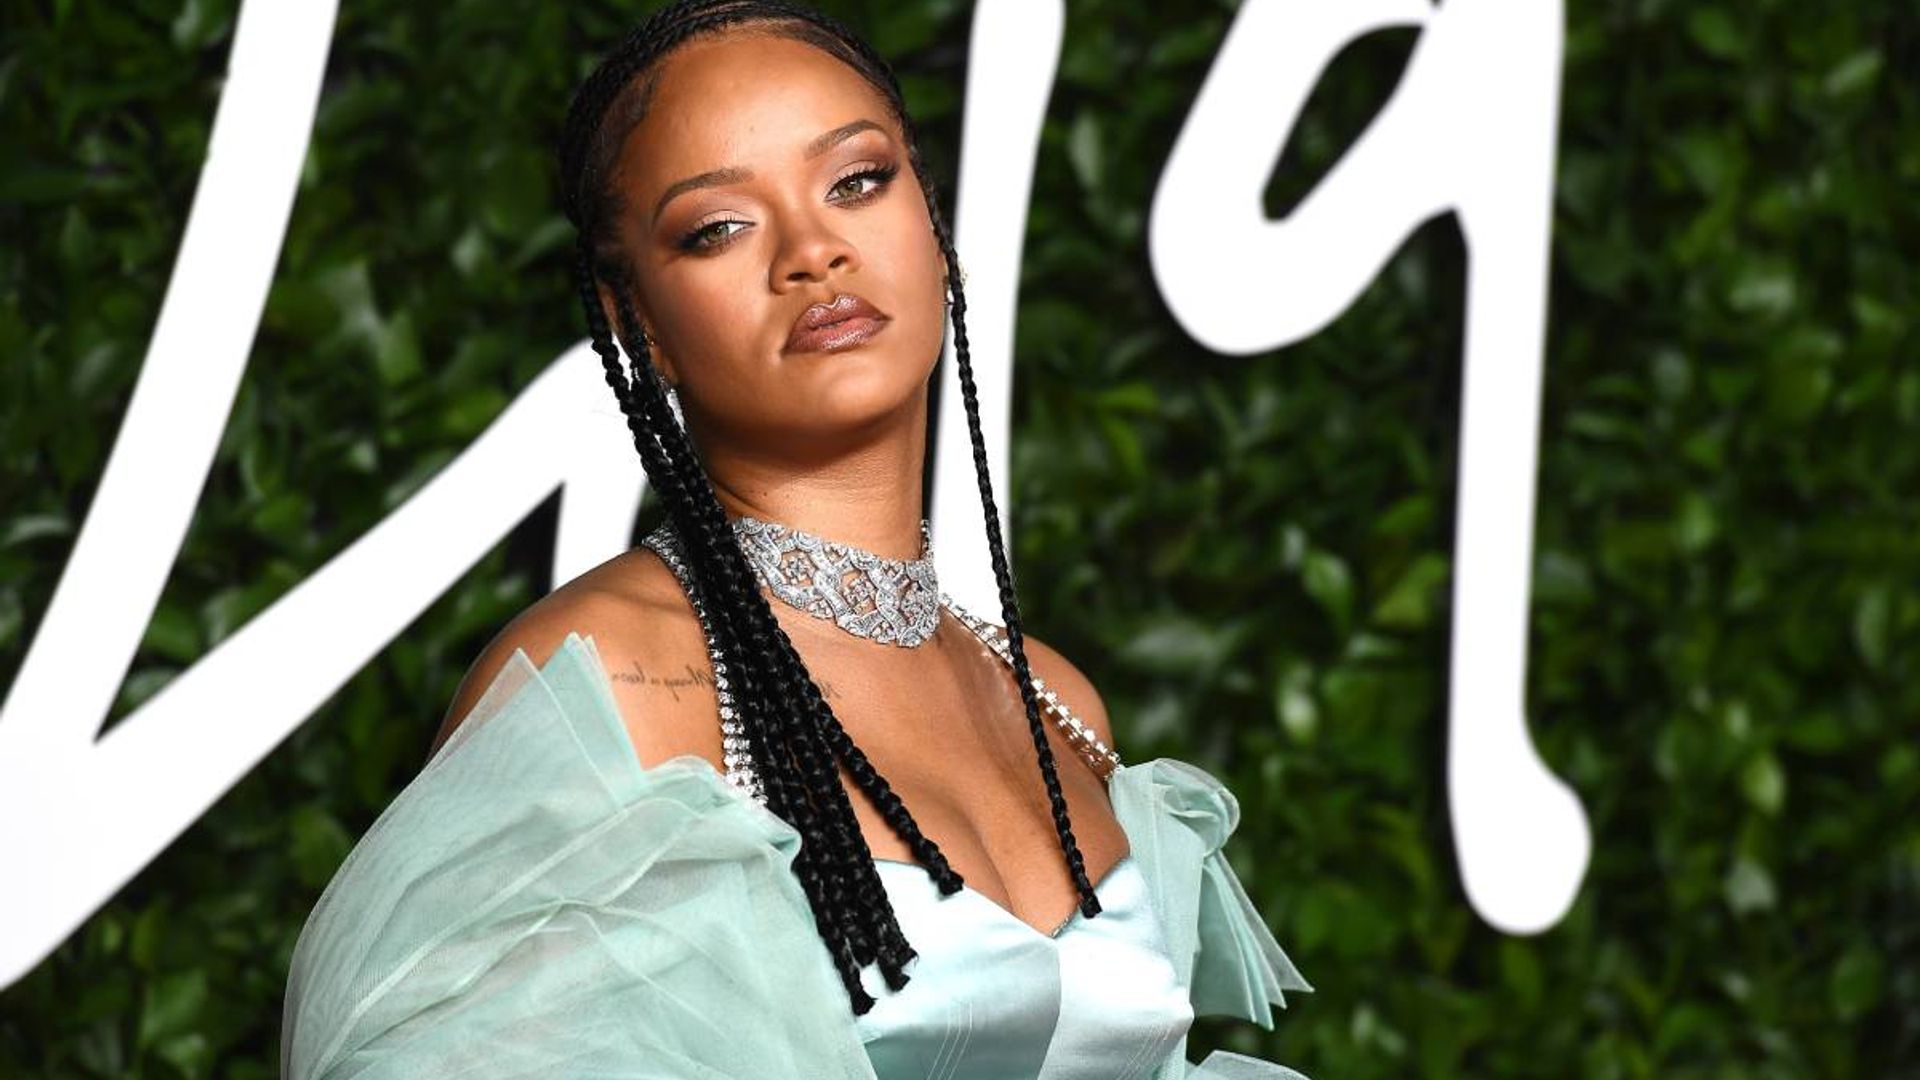 Rihanna nearly breaks the internet in strappy lingerie for a